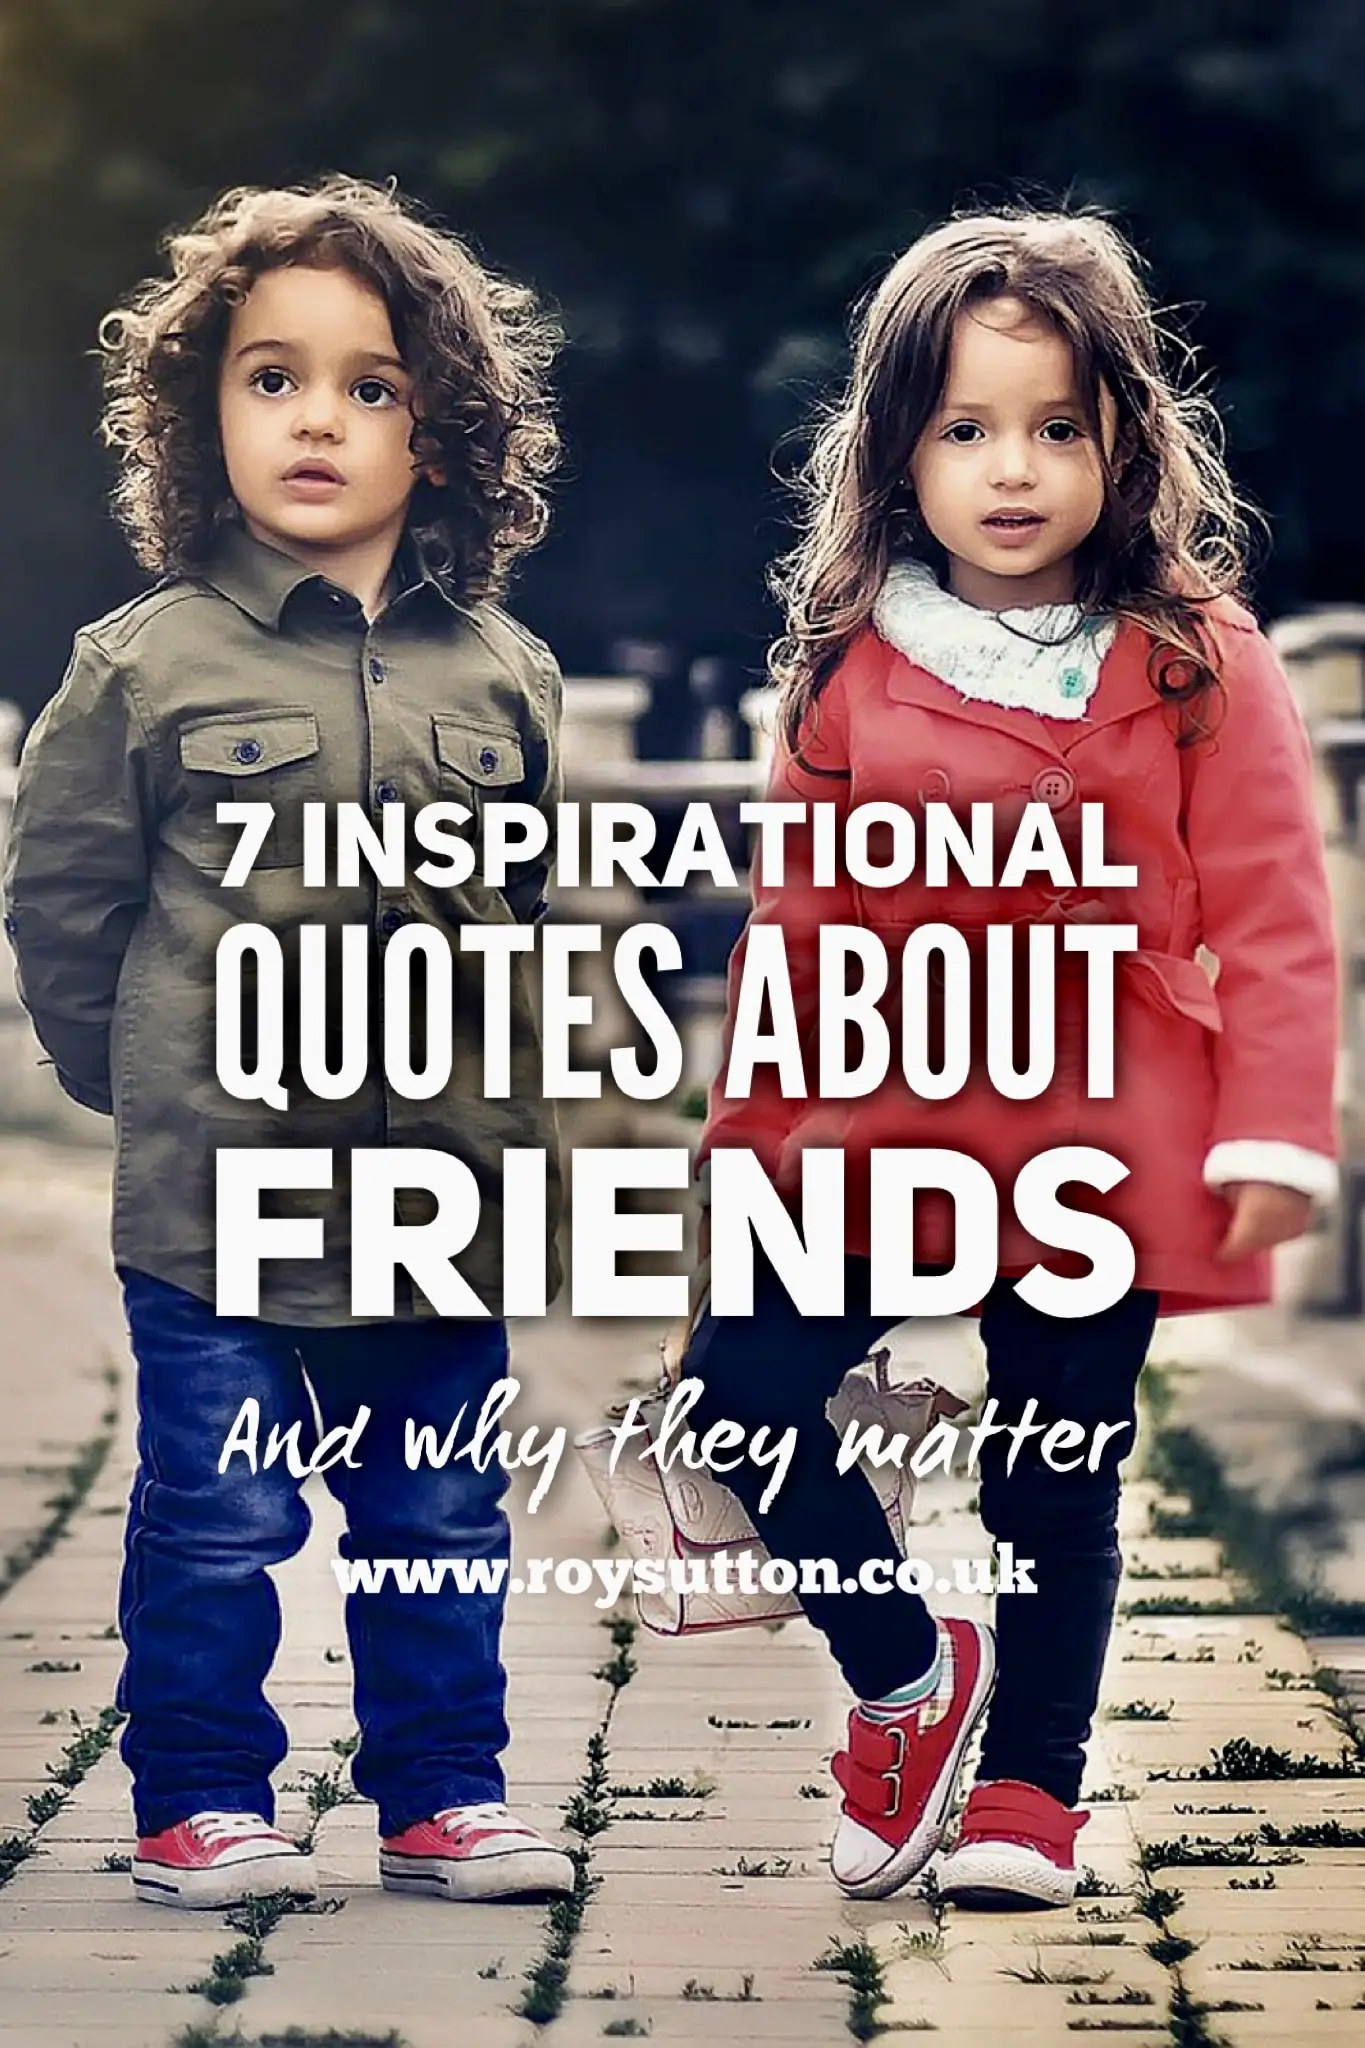 7 inspirational quotes about friends and why they matter